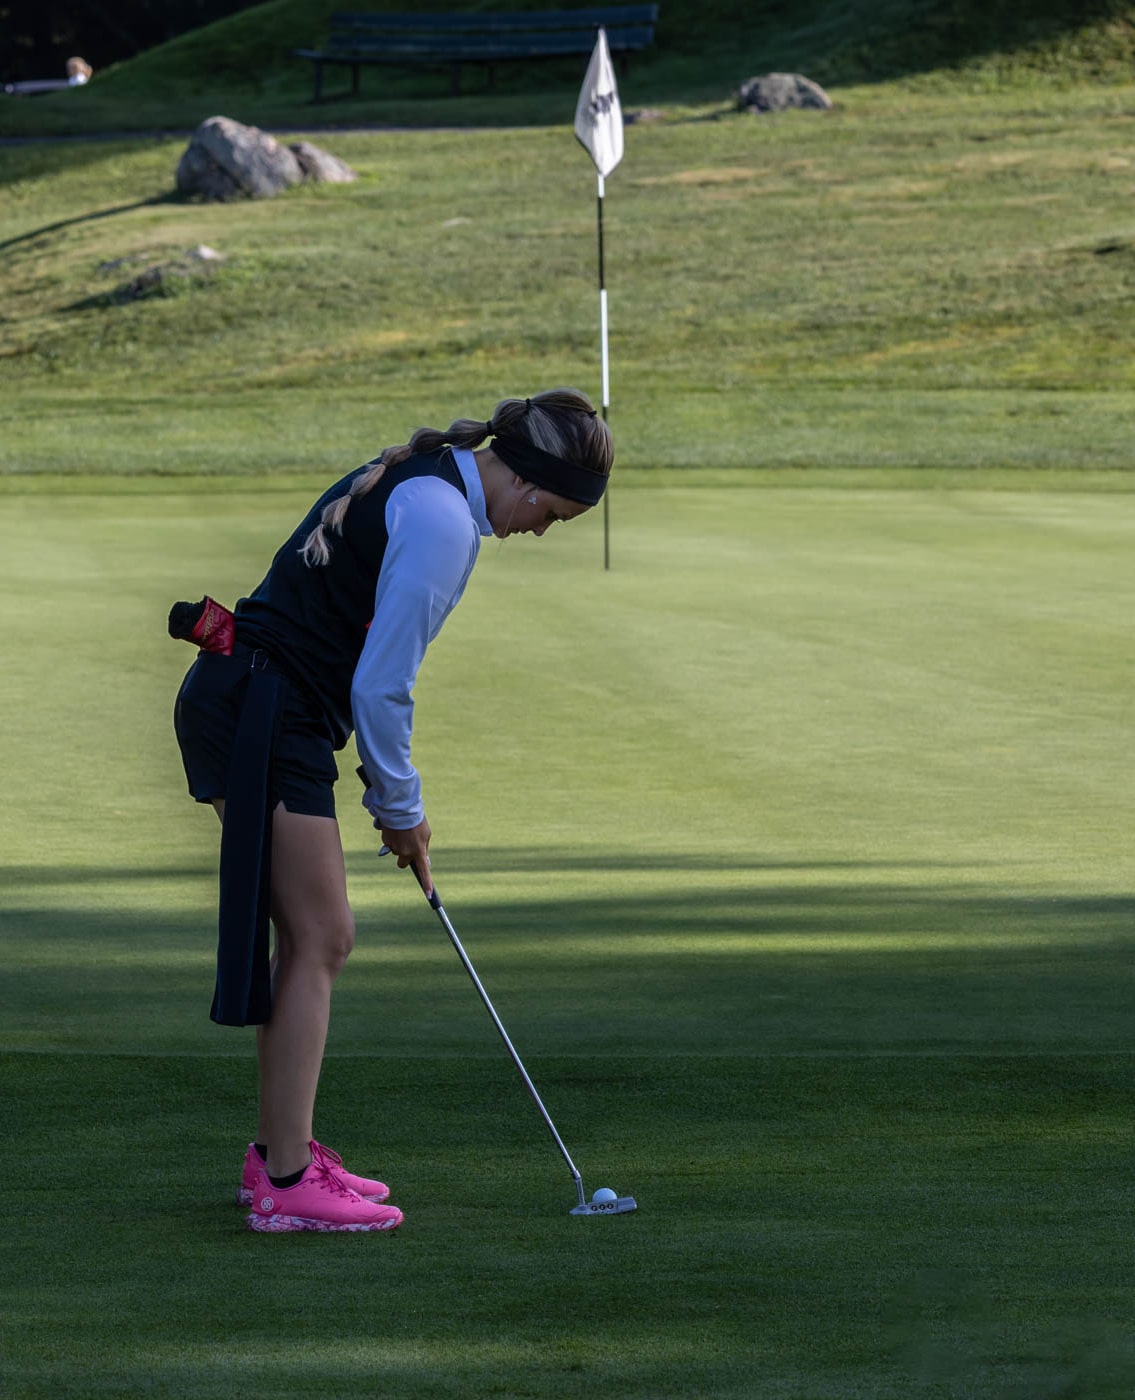 Country-Club-Of-New-Bedford FB-2023-Womens-FB-Gallery August-2023-Country-Club-Of-New-Bedford-FB-2023-Womens-FB-Gallery August-2023-Womens-FB-Gallery-Thursday-Photos-Image-3